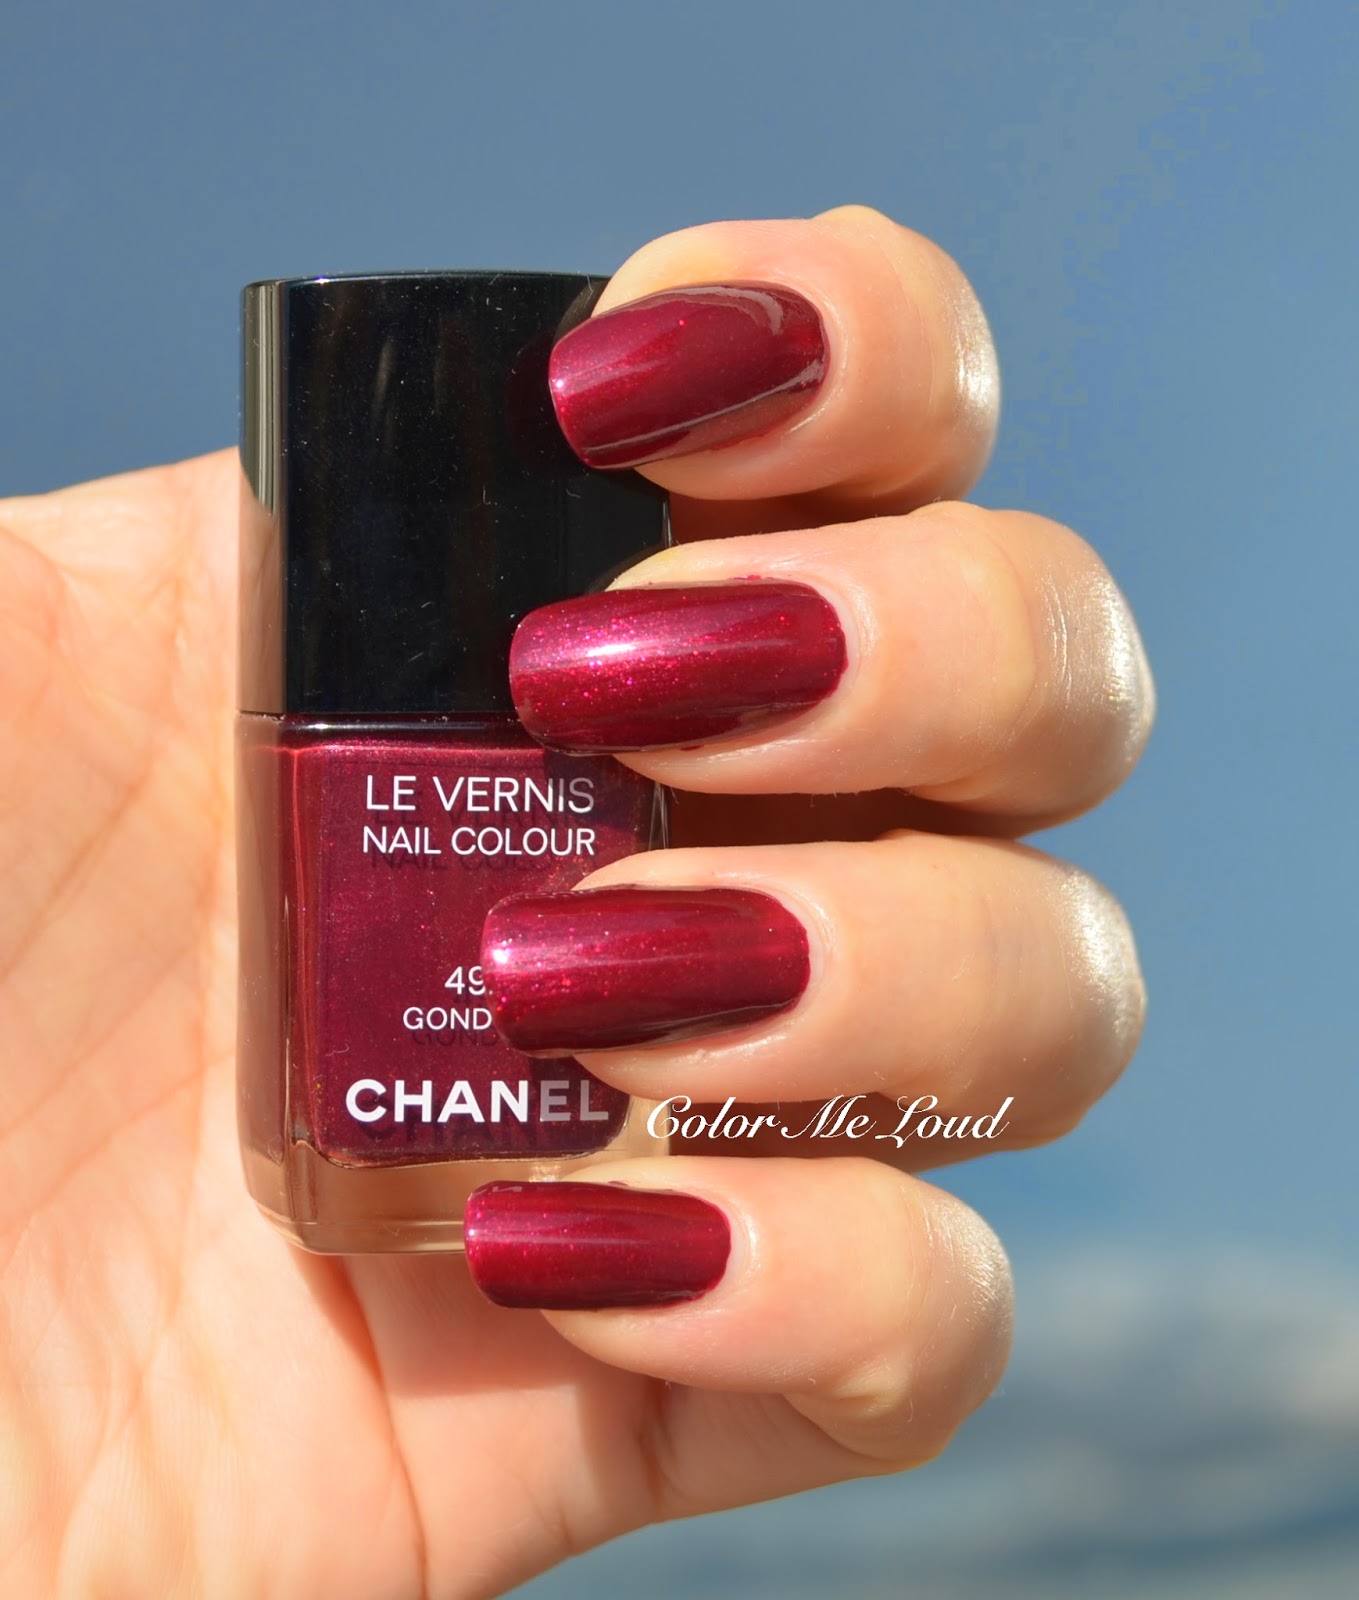 Chanel le vernis nail polish review: Spring shades are here